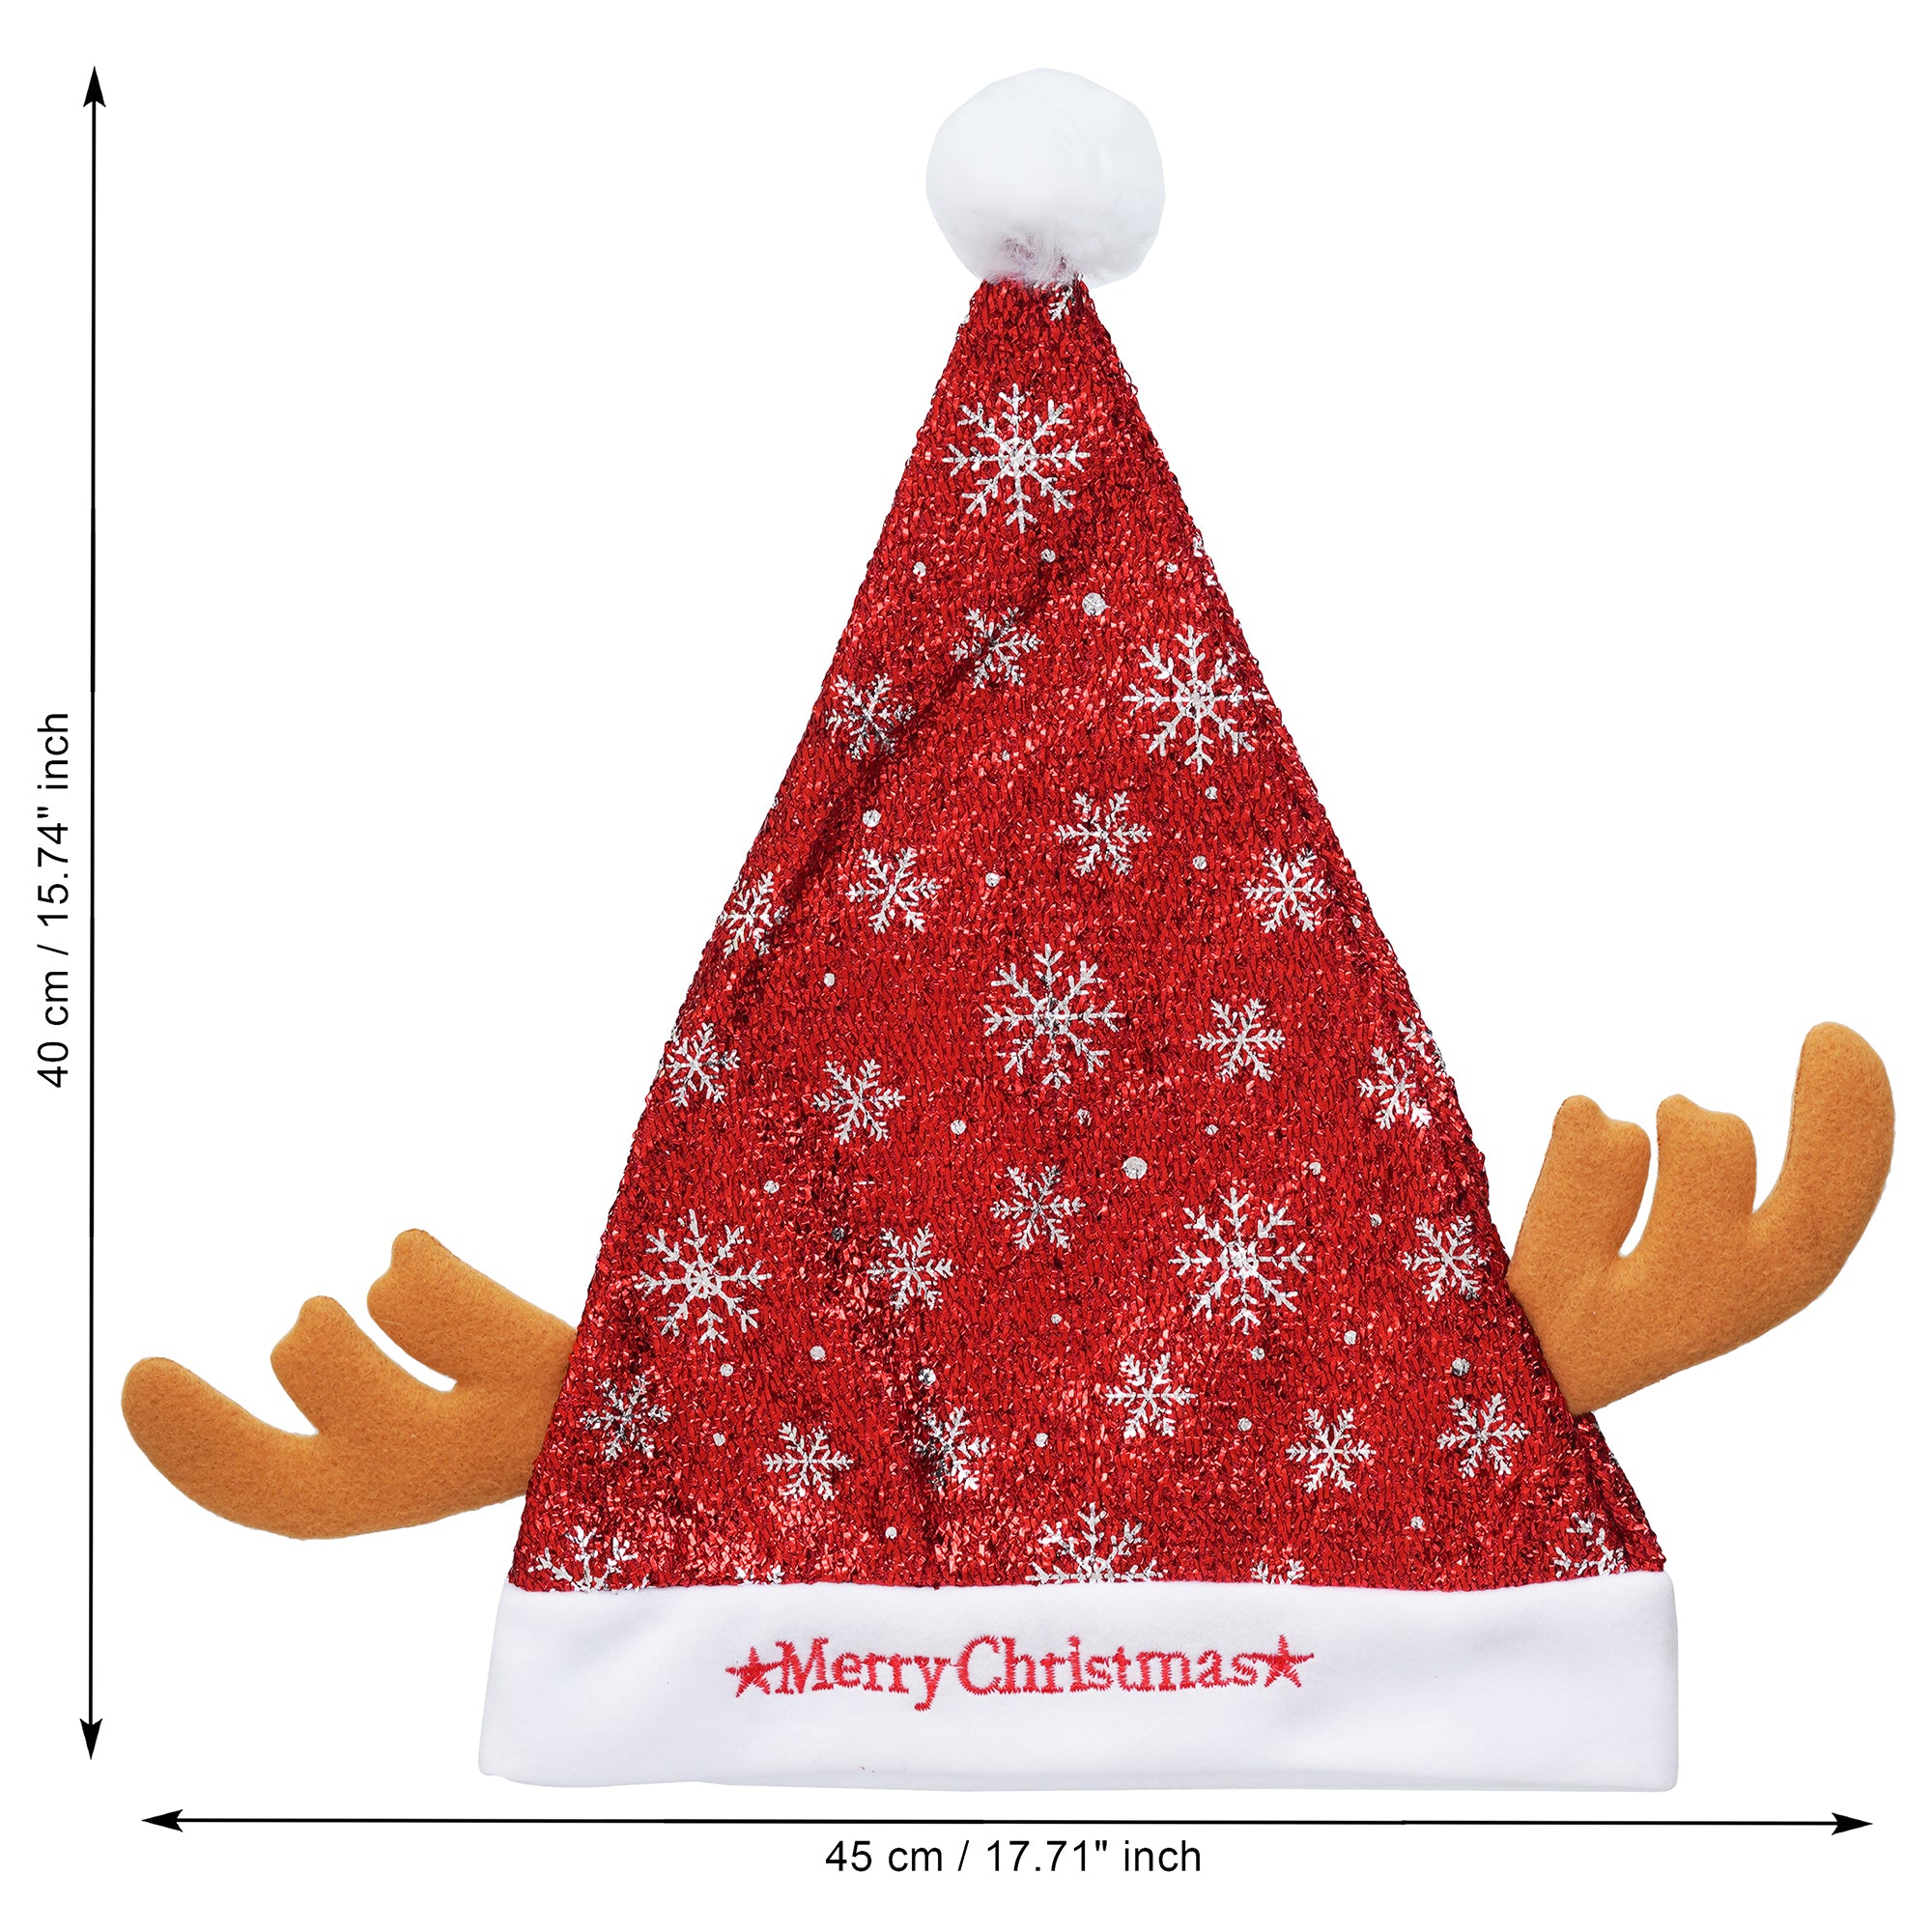 eCraftIndia Merry Christmas Snowflake Star Printed Santa Cap  Santa Claus Hat for Christmas Party Best Gift for Boys & Girls 3